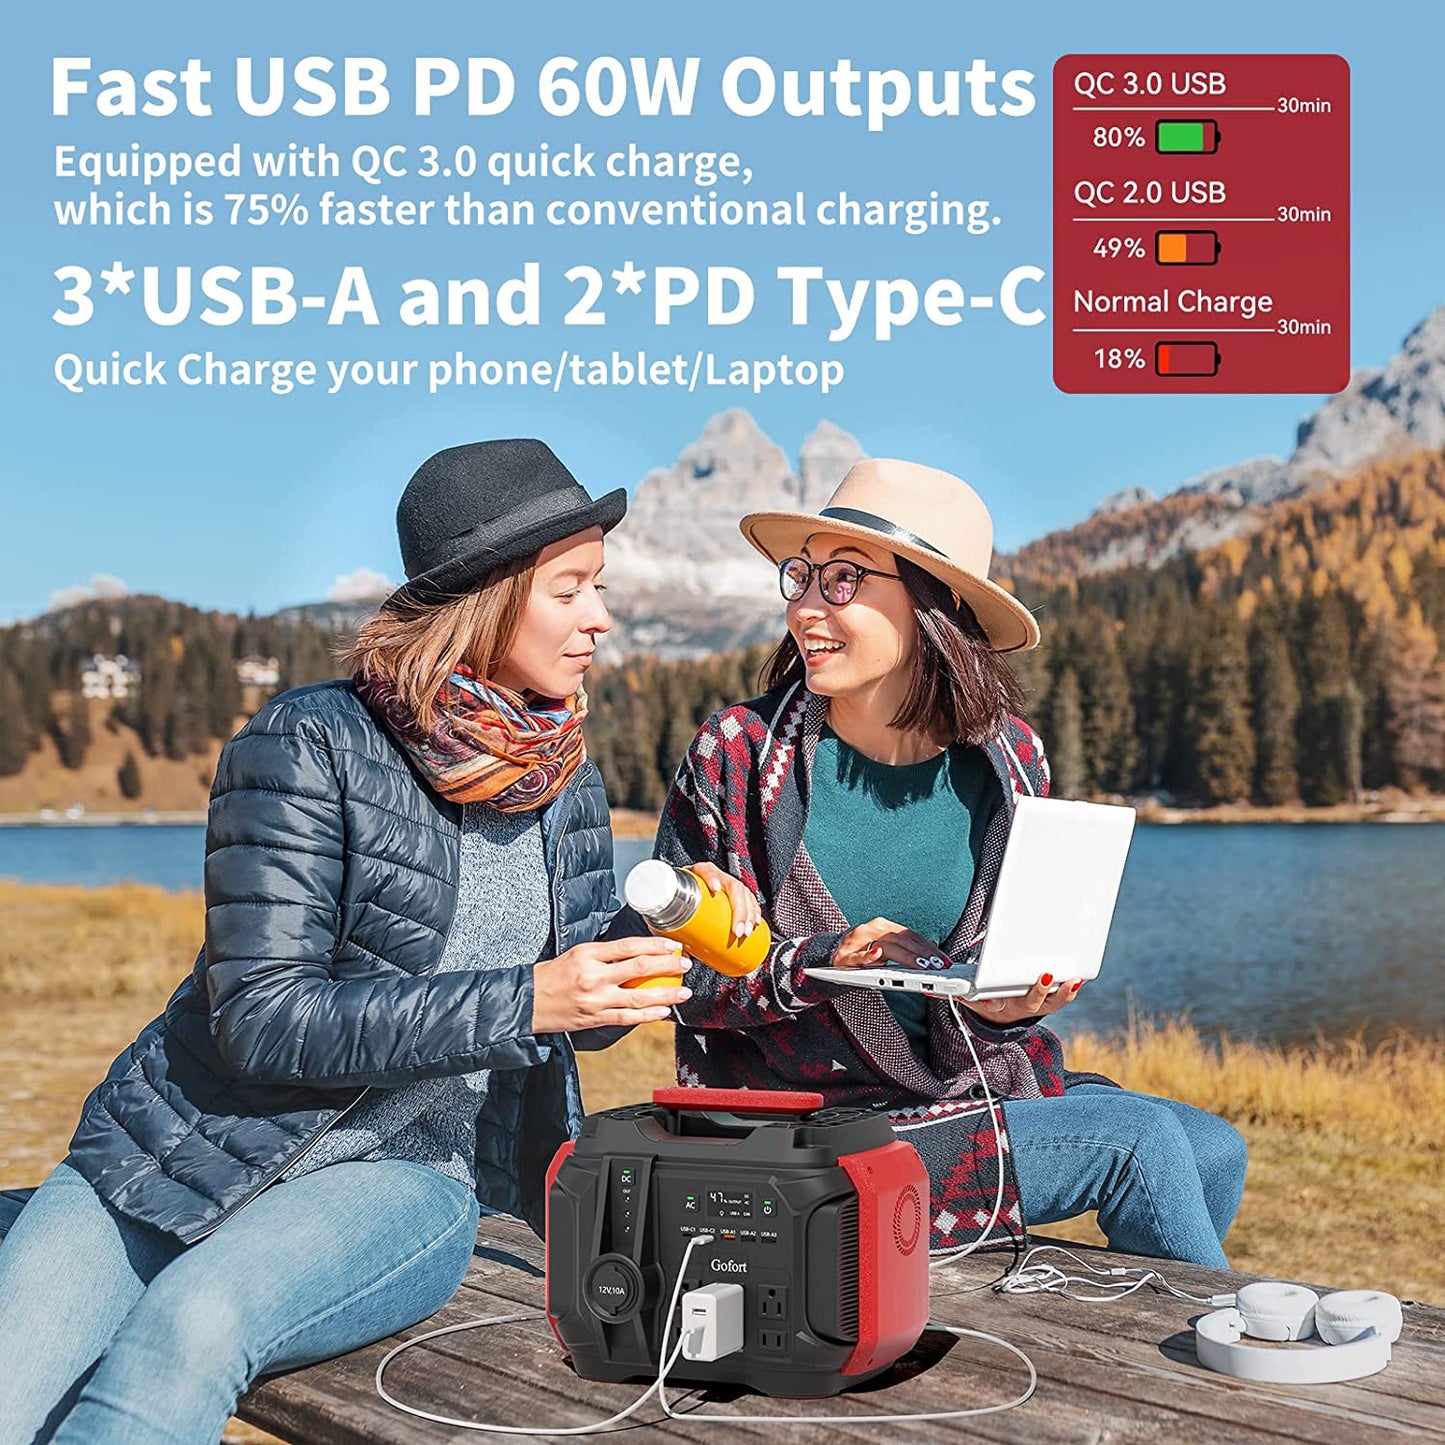 The Gofort A501 Has 3*USB-A and 2*PD Type-C Outputs